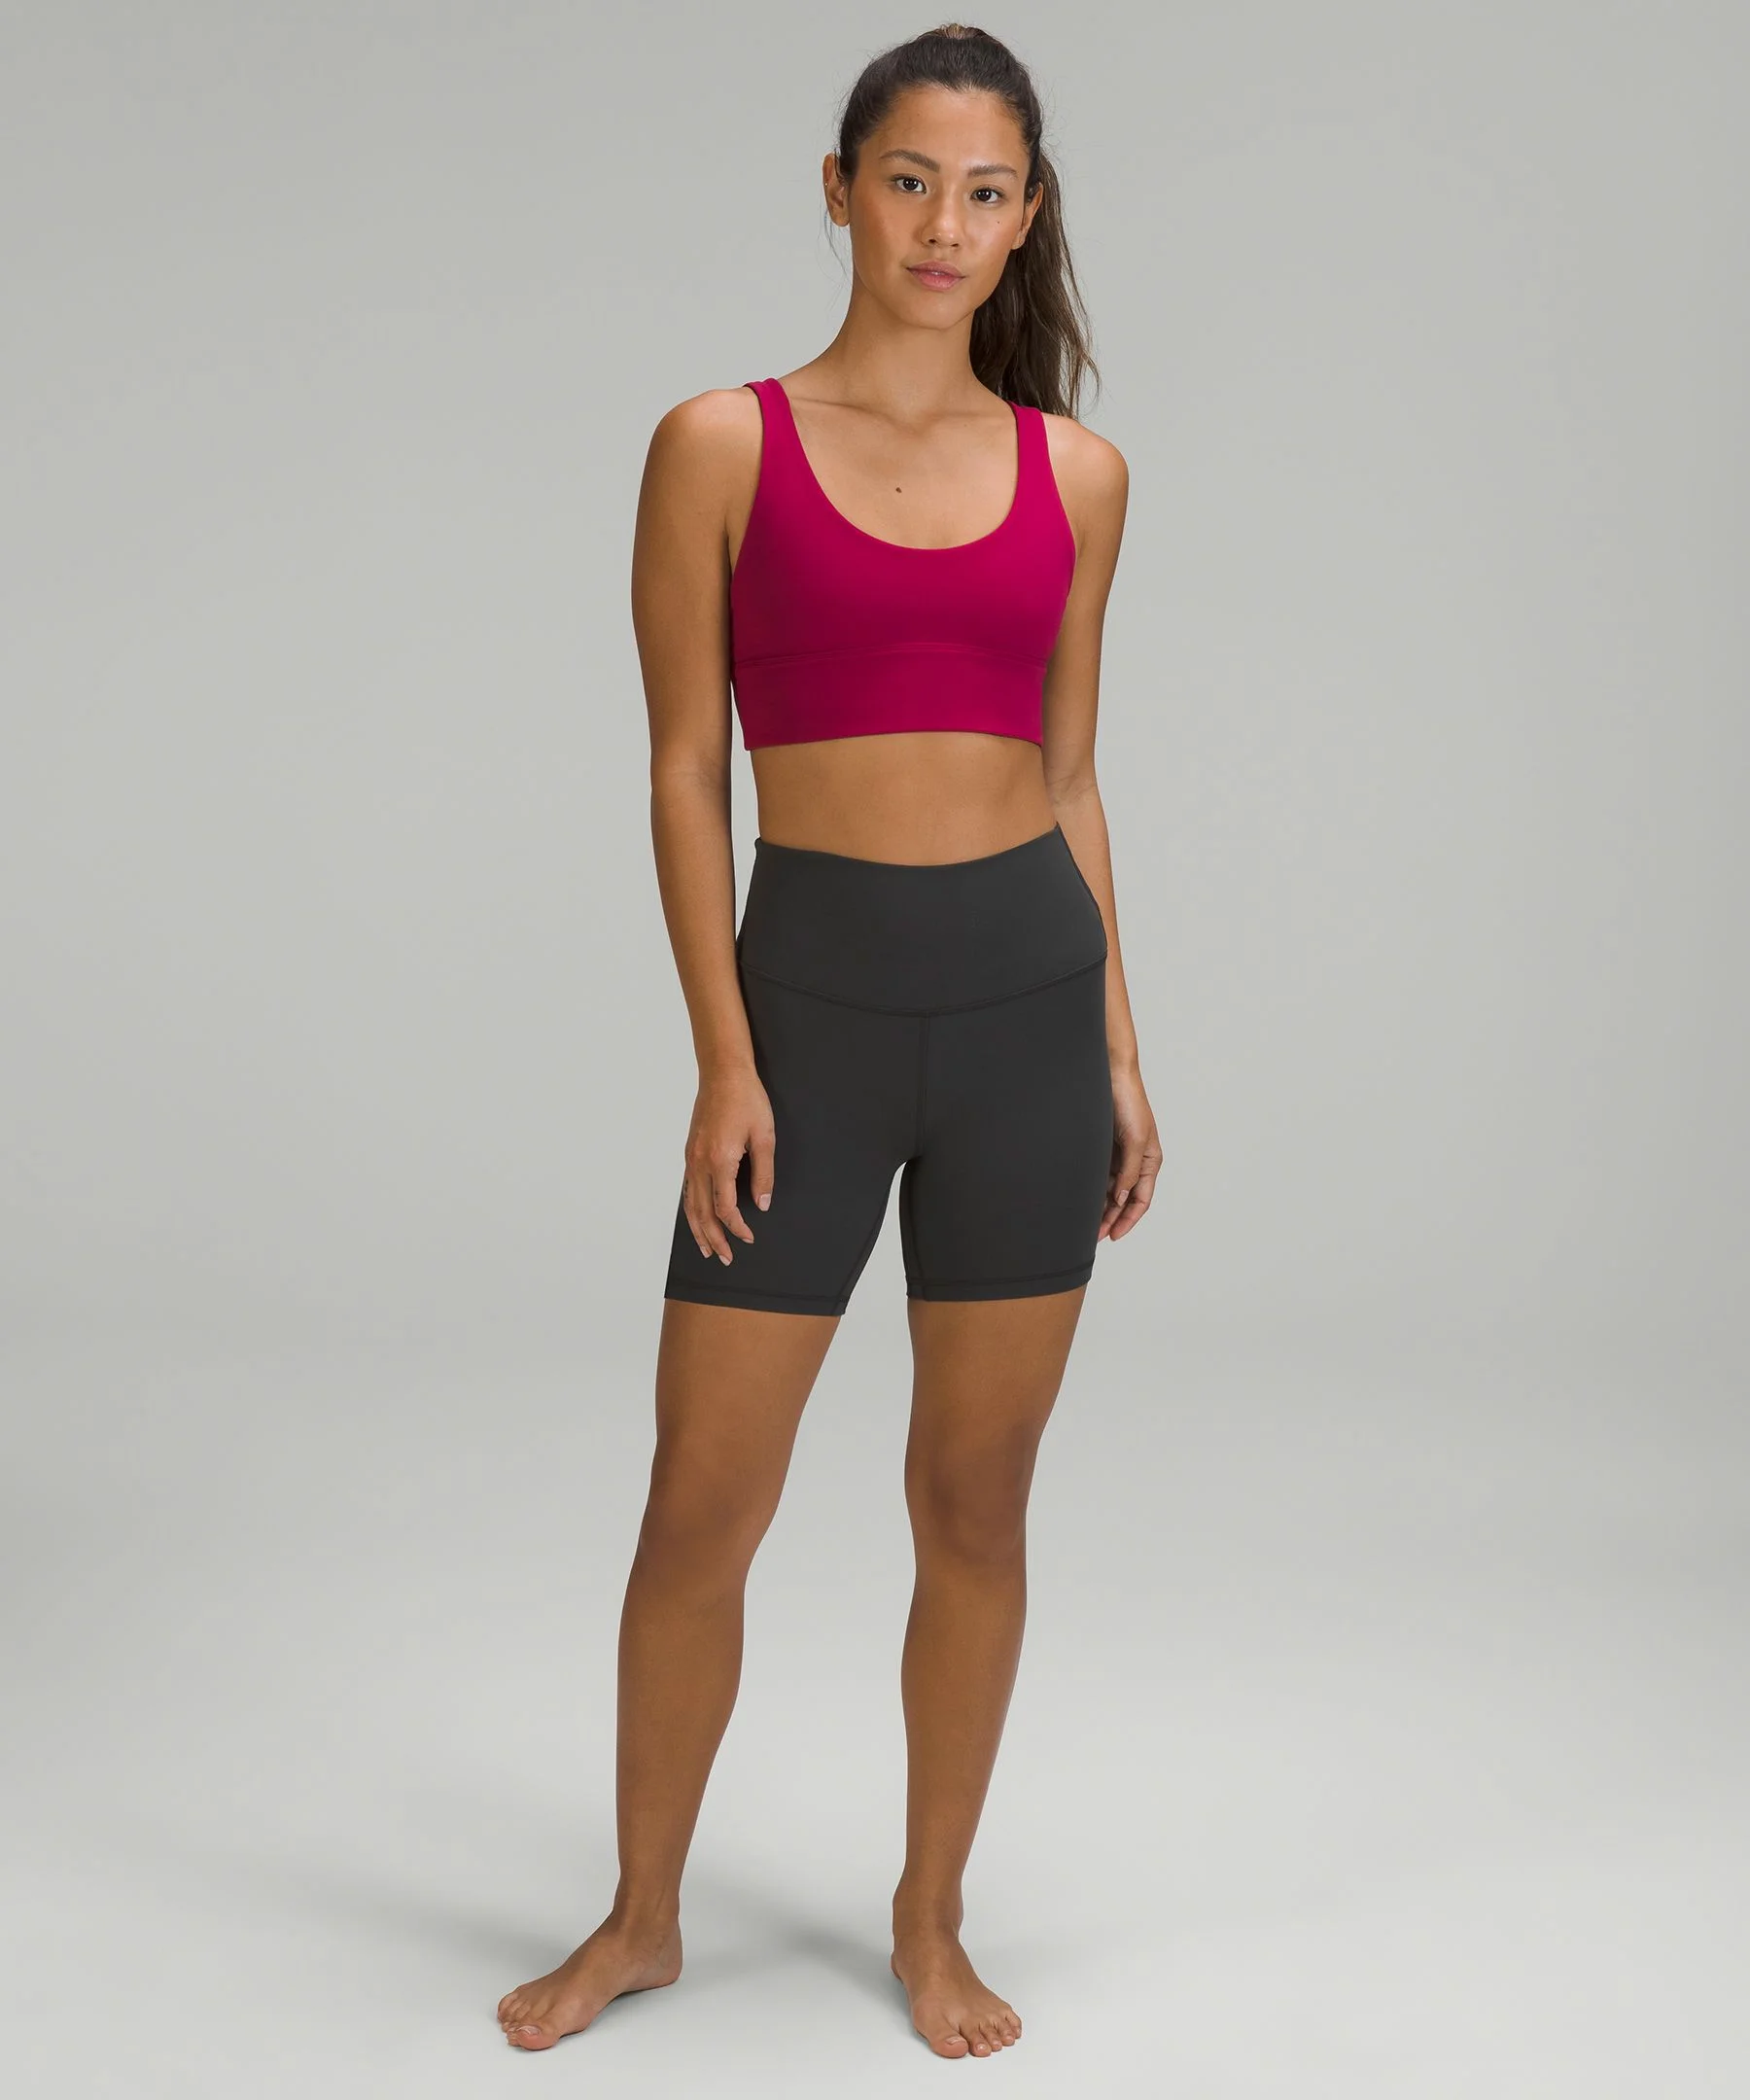 lululemon Align™ Reversible Bra *Light Support, A/B Cup, Mulled  Wine/Canyon Orange